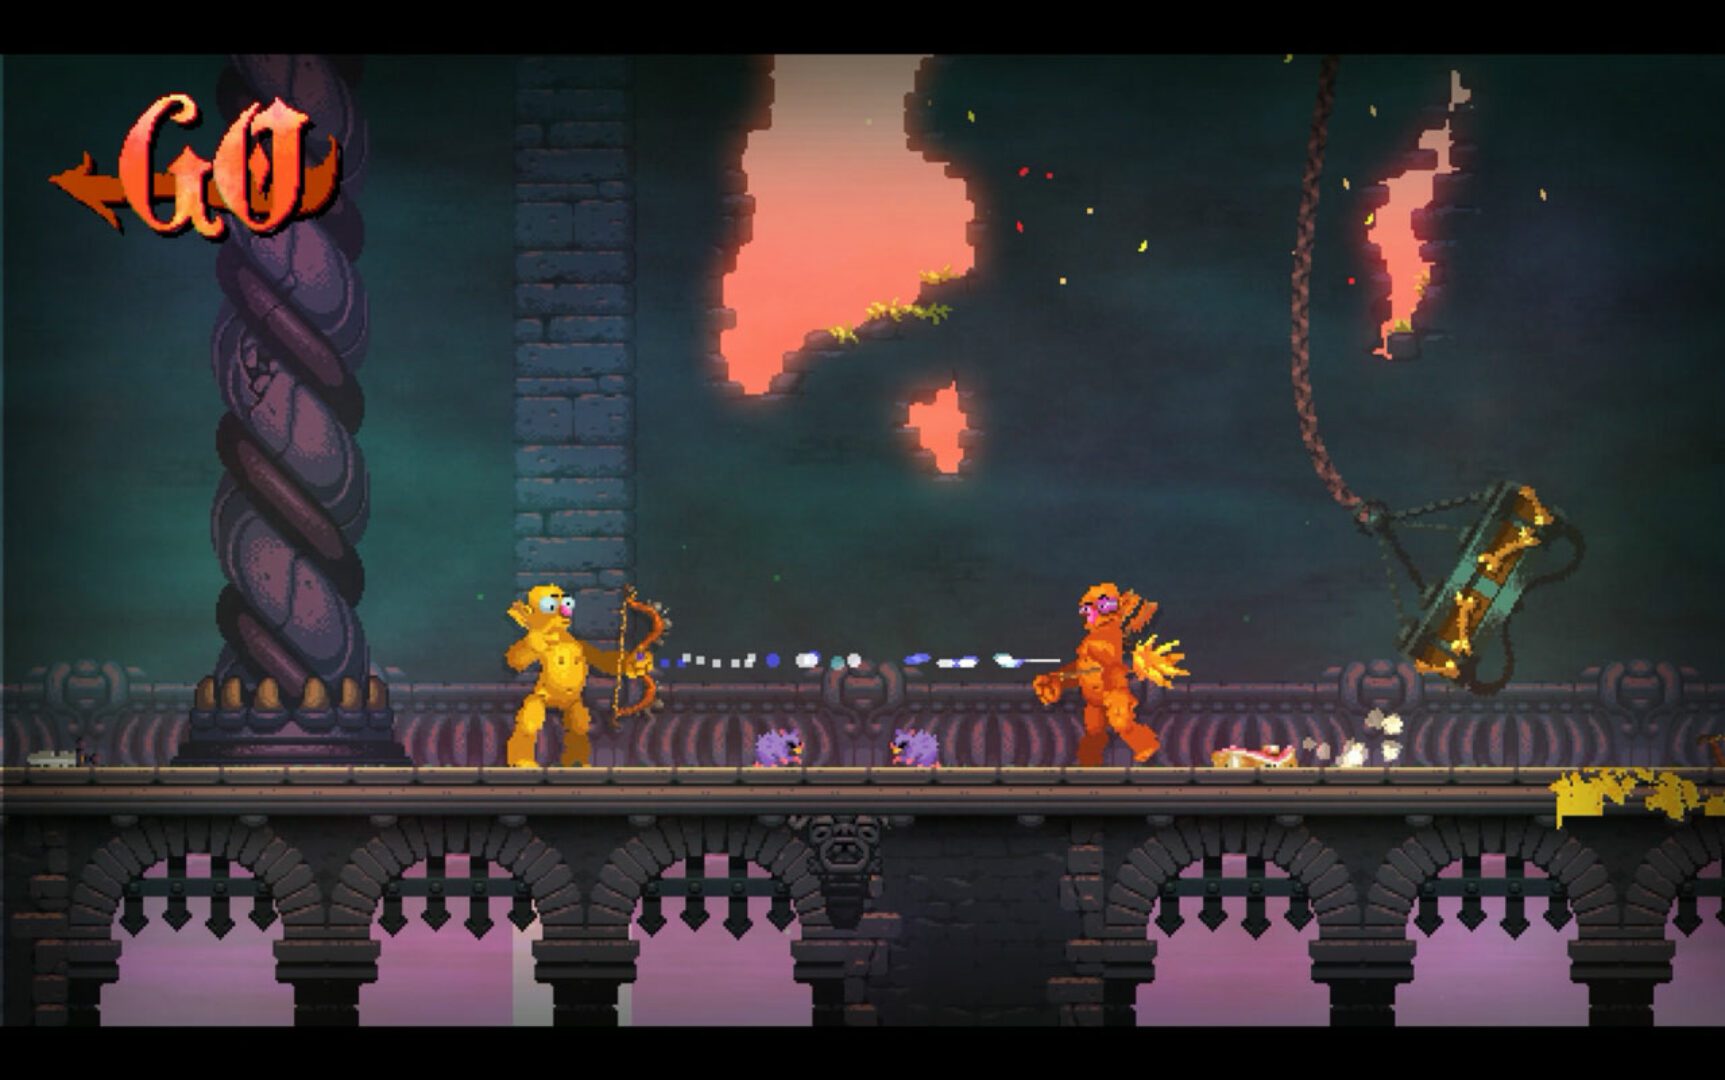 Nidhogg 2 Arriving on PS4 & PC on August 15th